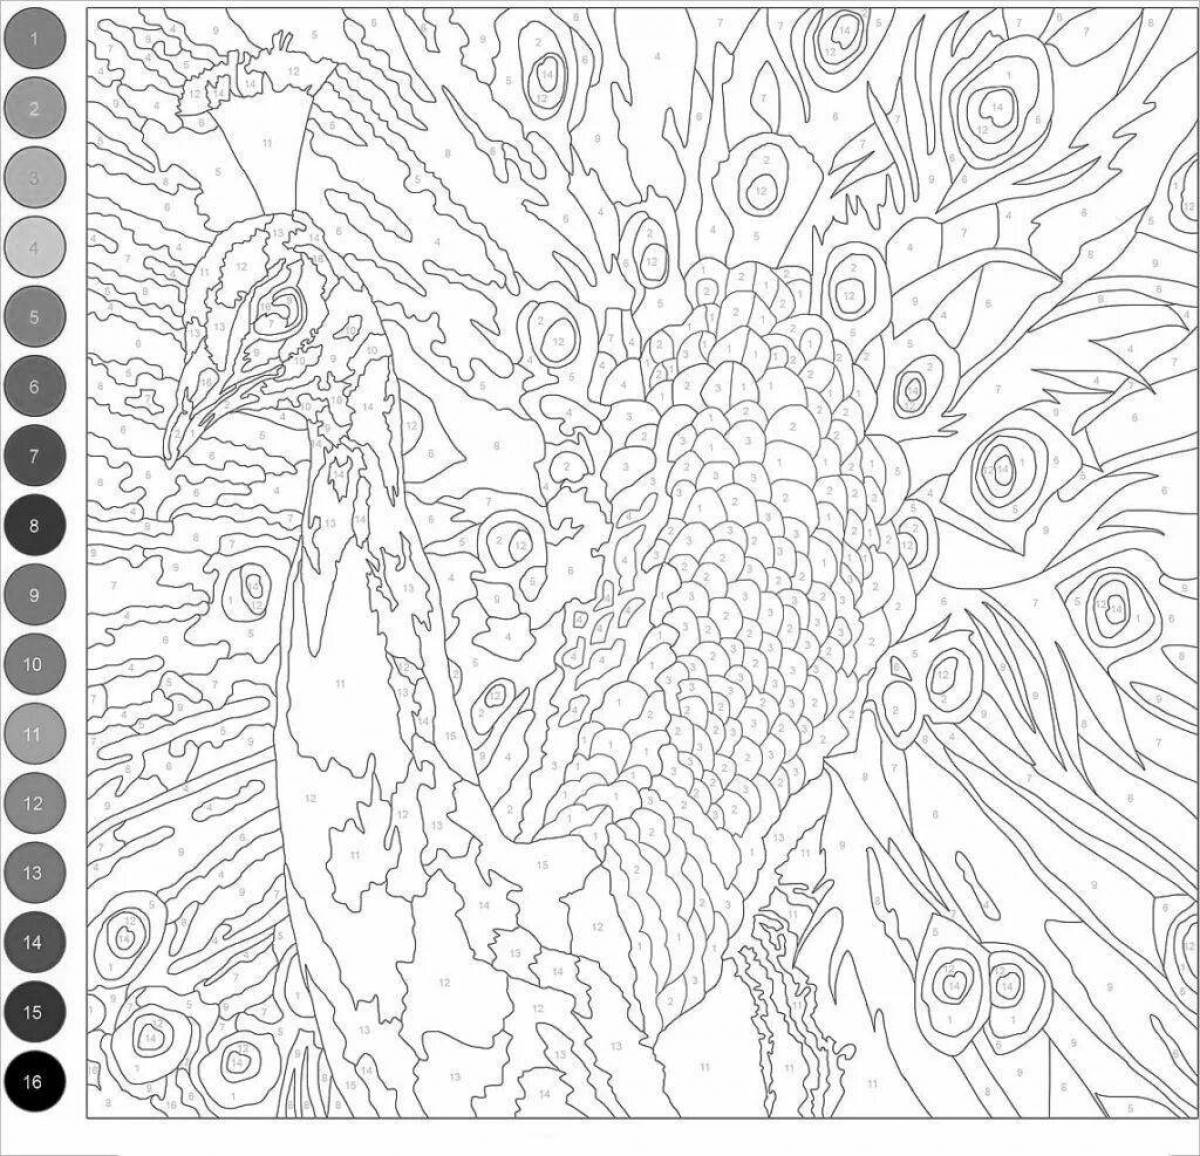 Do-by-numbers fun coloring book